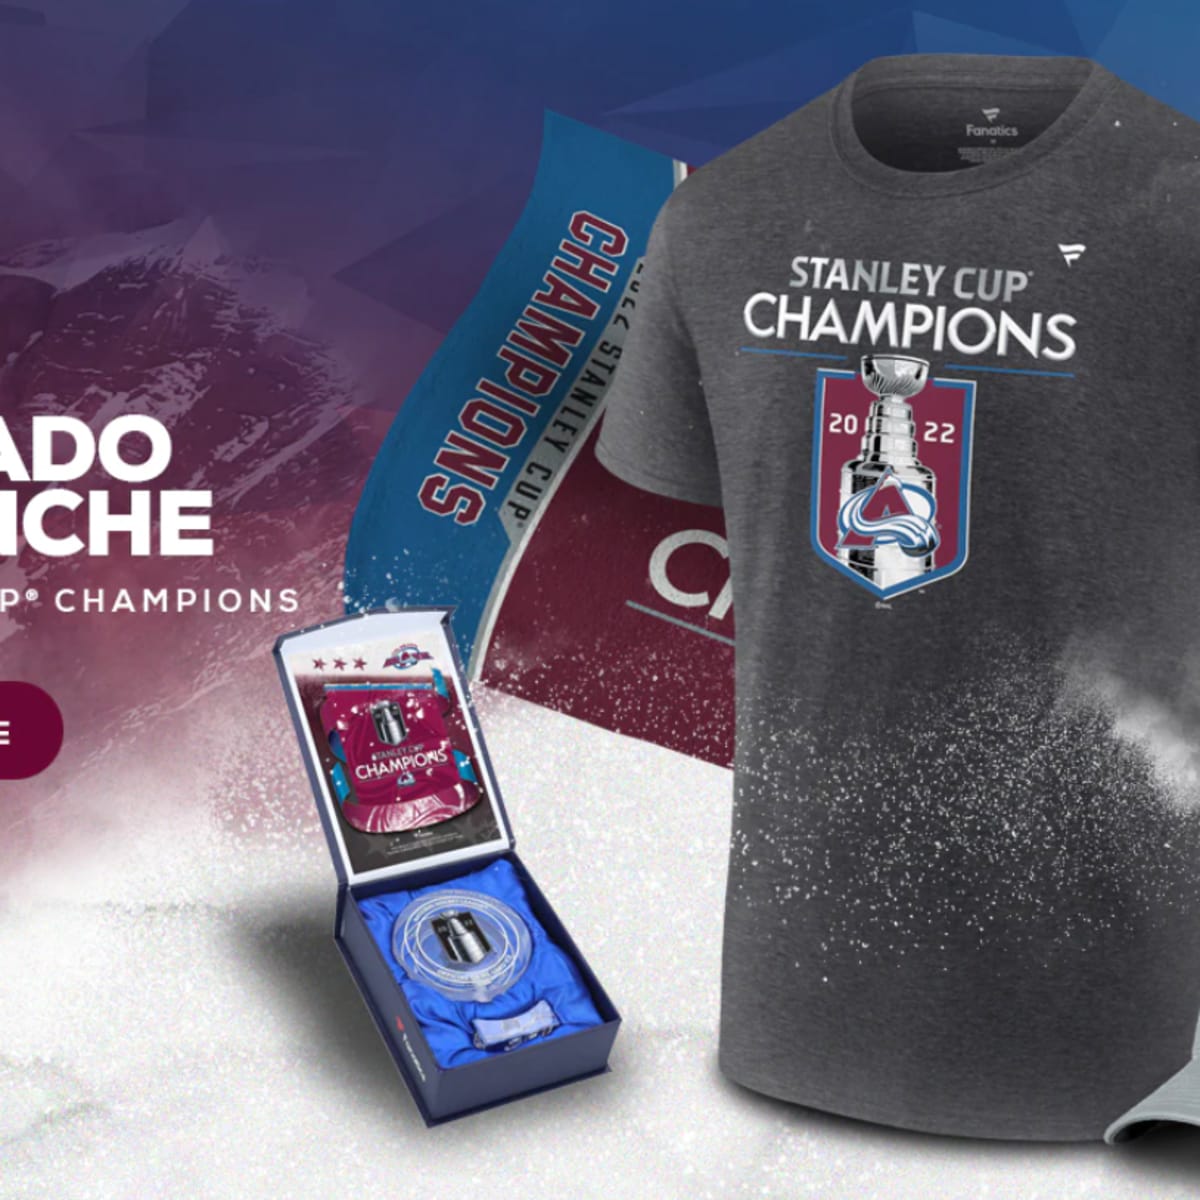 Colorado Avalanche win first Stanley Cup since 2001: How to buy Avalanche Stanley  Cup Champions t-shirt, gear 